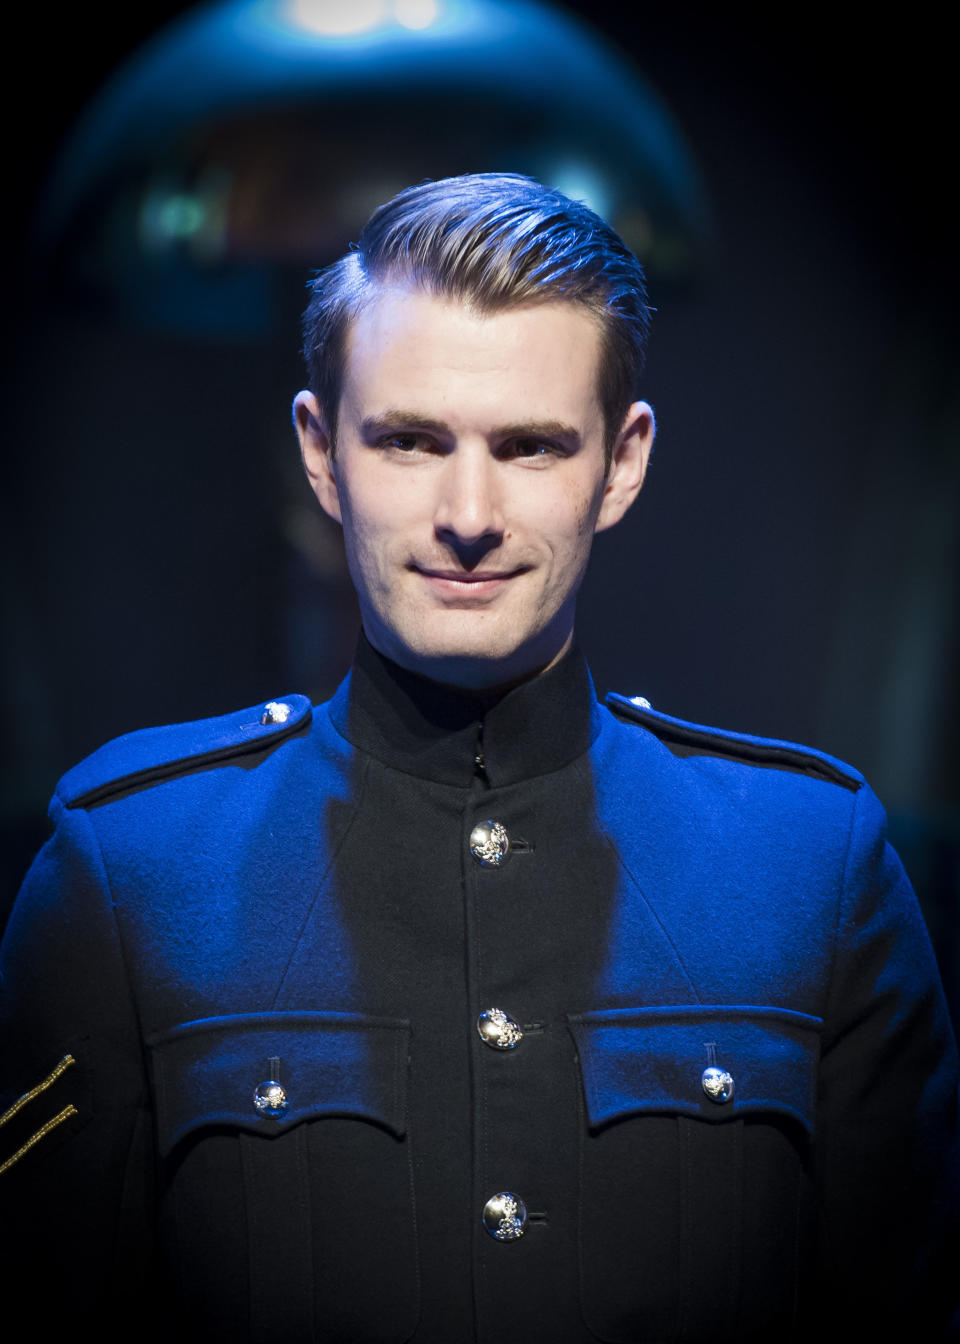 Lance Corporal Richard Jones on stage during the Impossible photocall at the Noël Coward Theatre, St Martin's Lane in London. 